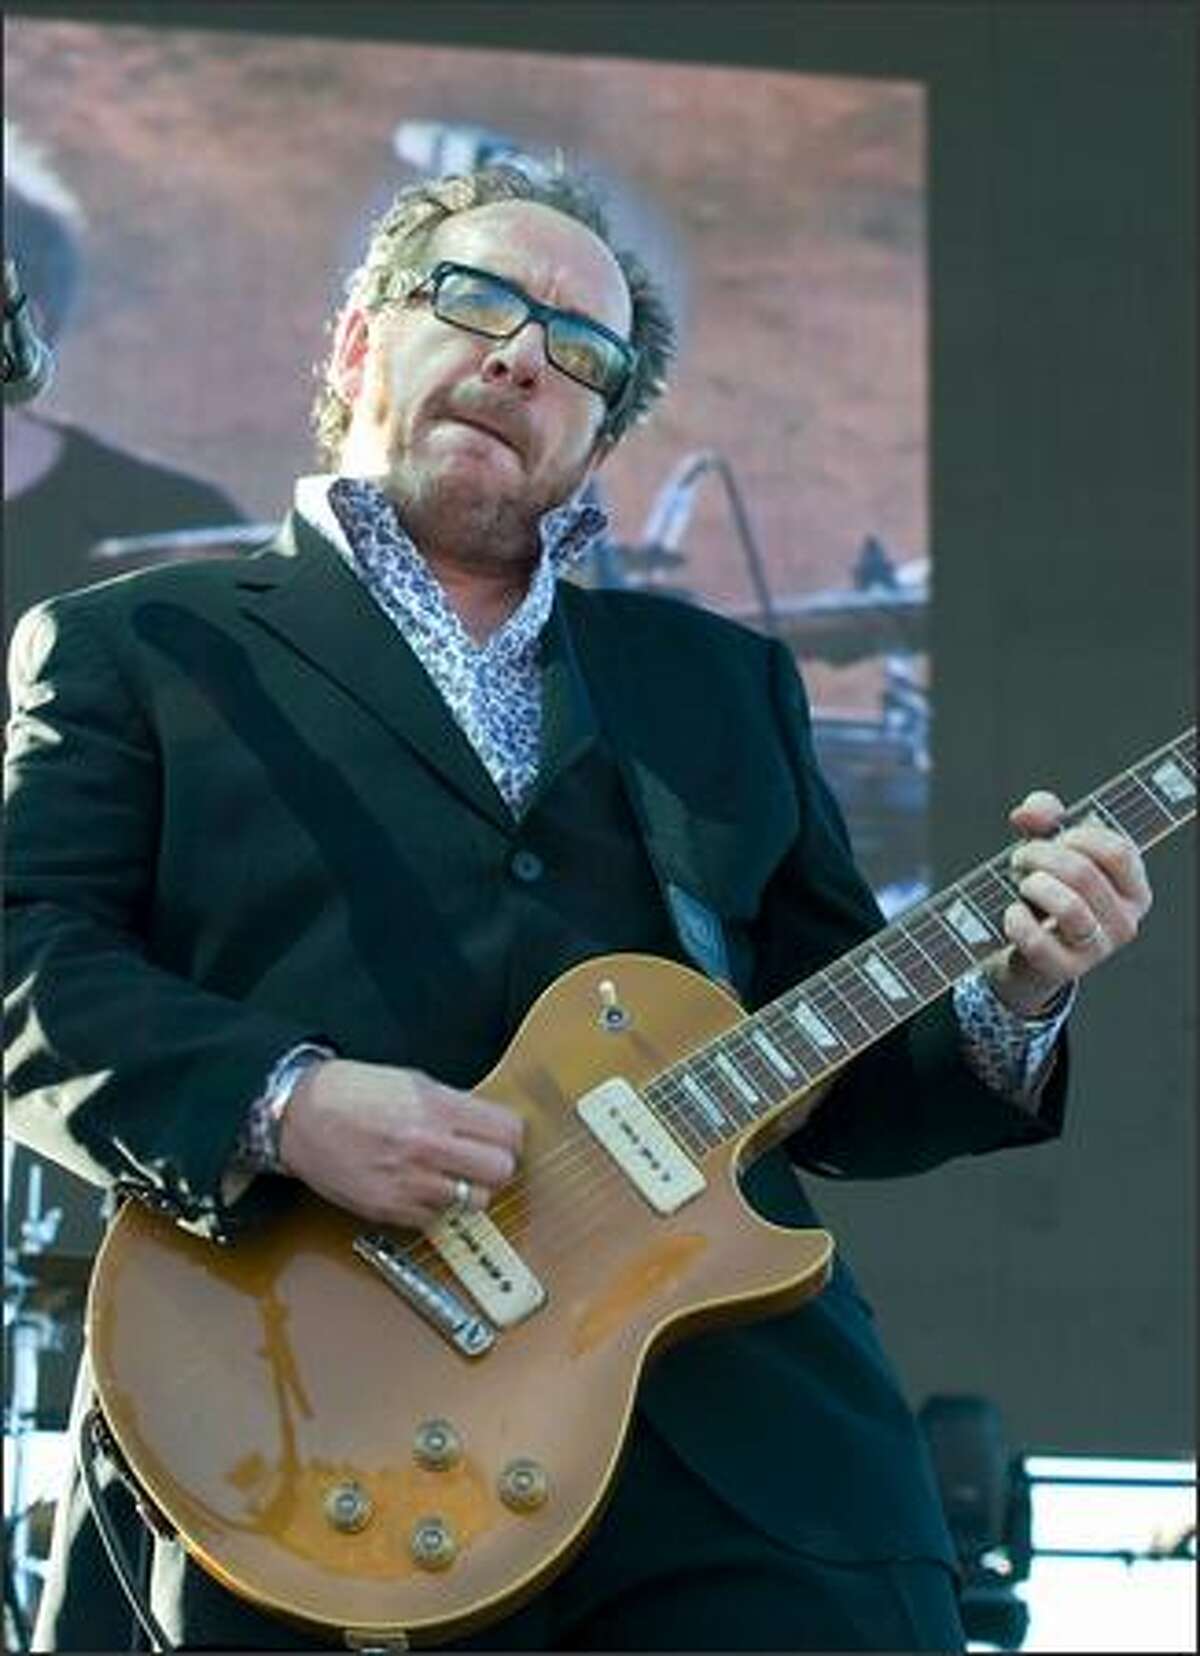 Elvis Costello and the Imposters perform at the Gorge Amphitheatre.